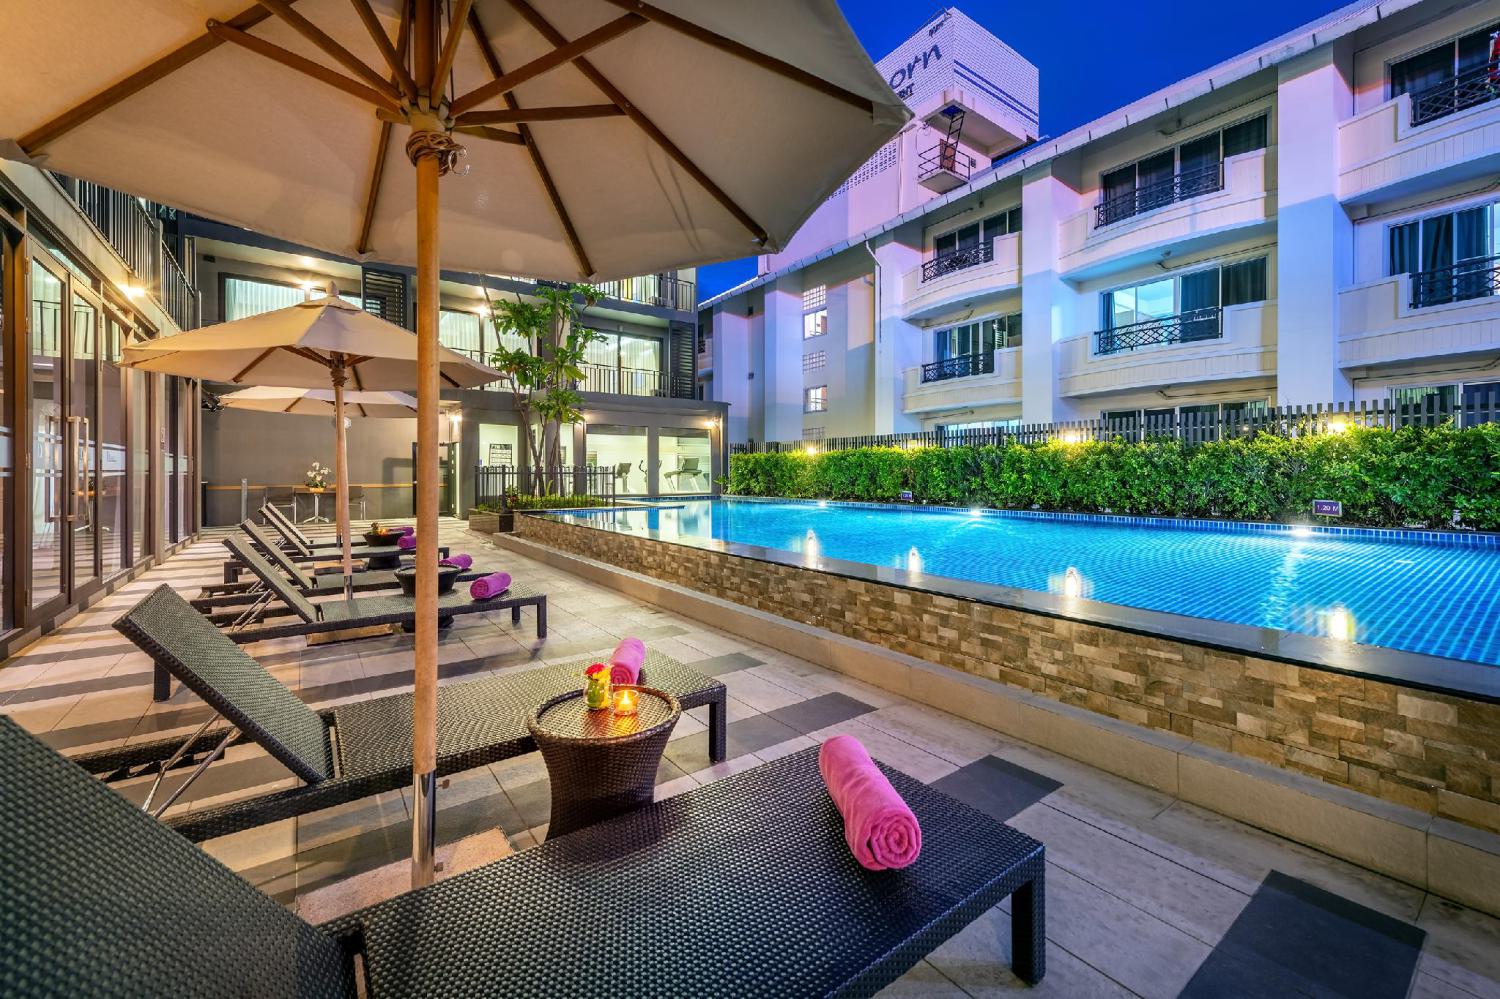 PLAAI Prime Hotel Rayong (Formerly D Varee Diva Central Rayong) - Image 2